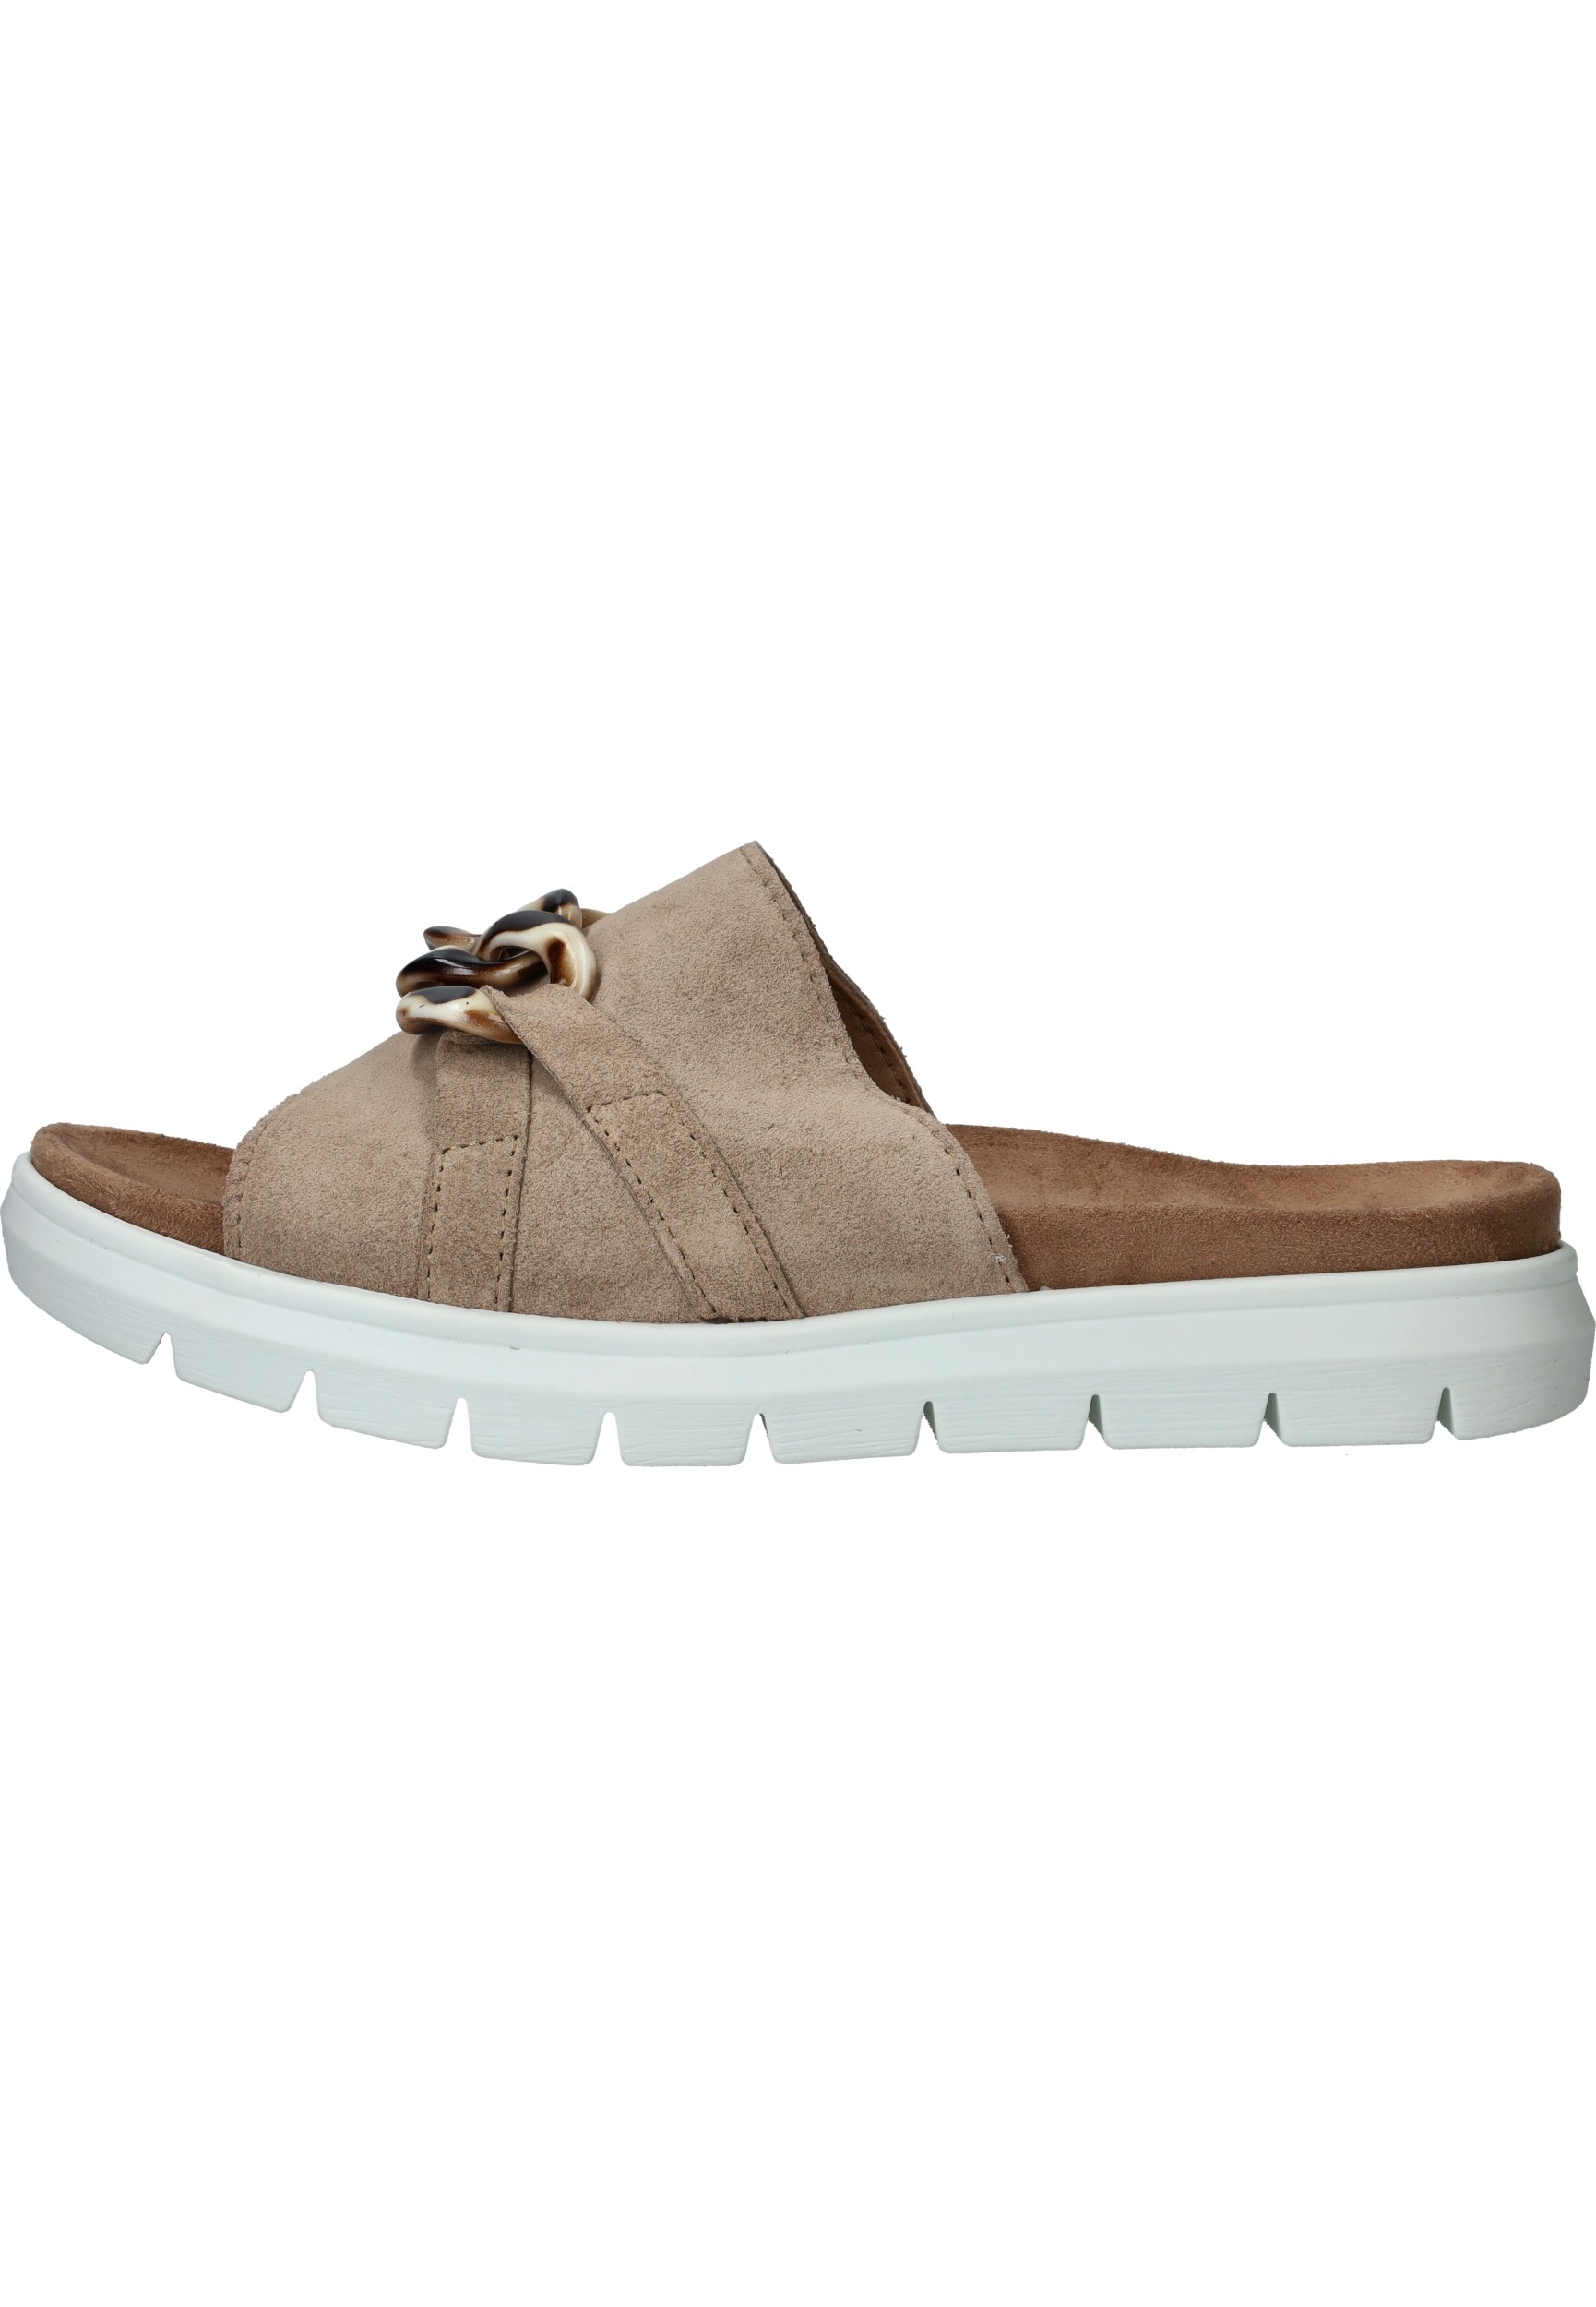 Sens Slippers Dames Taupe